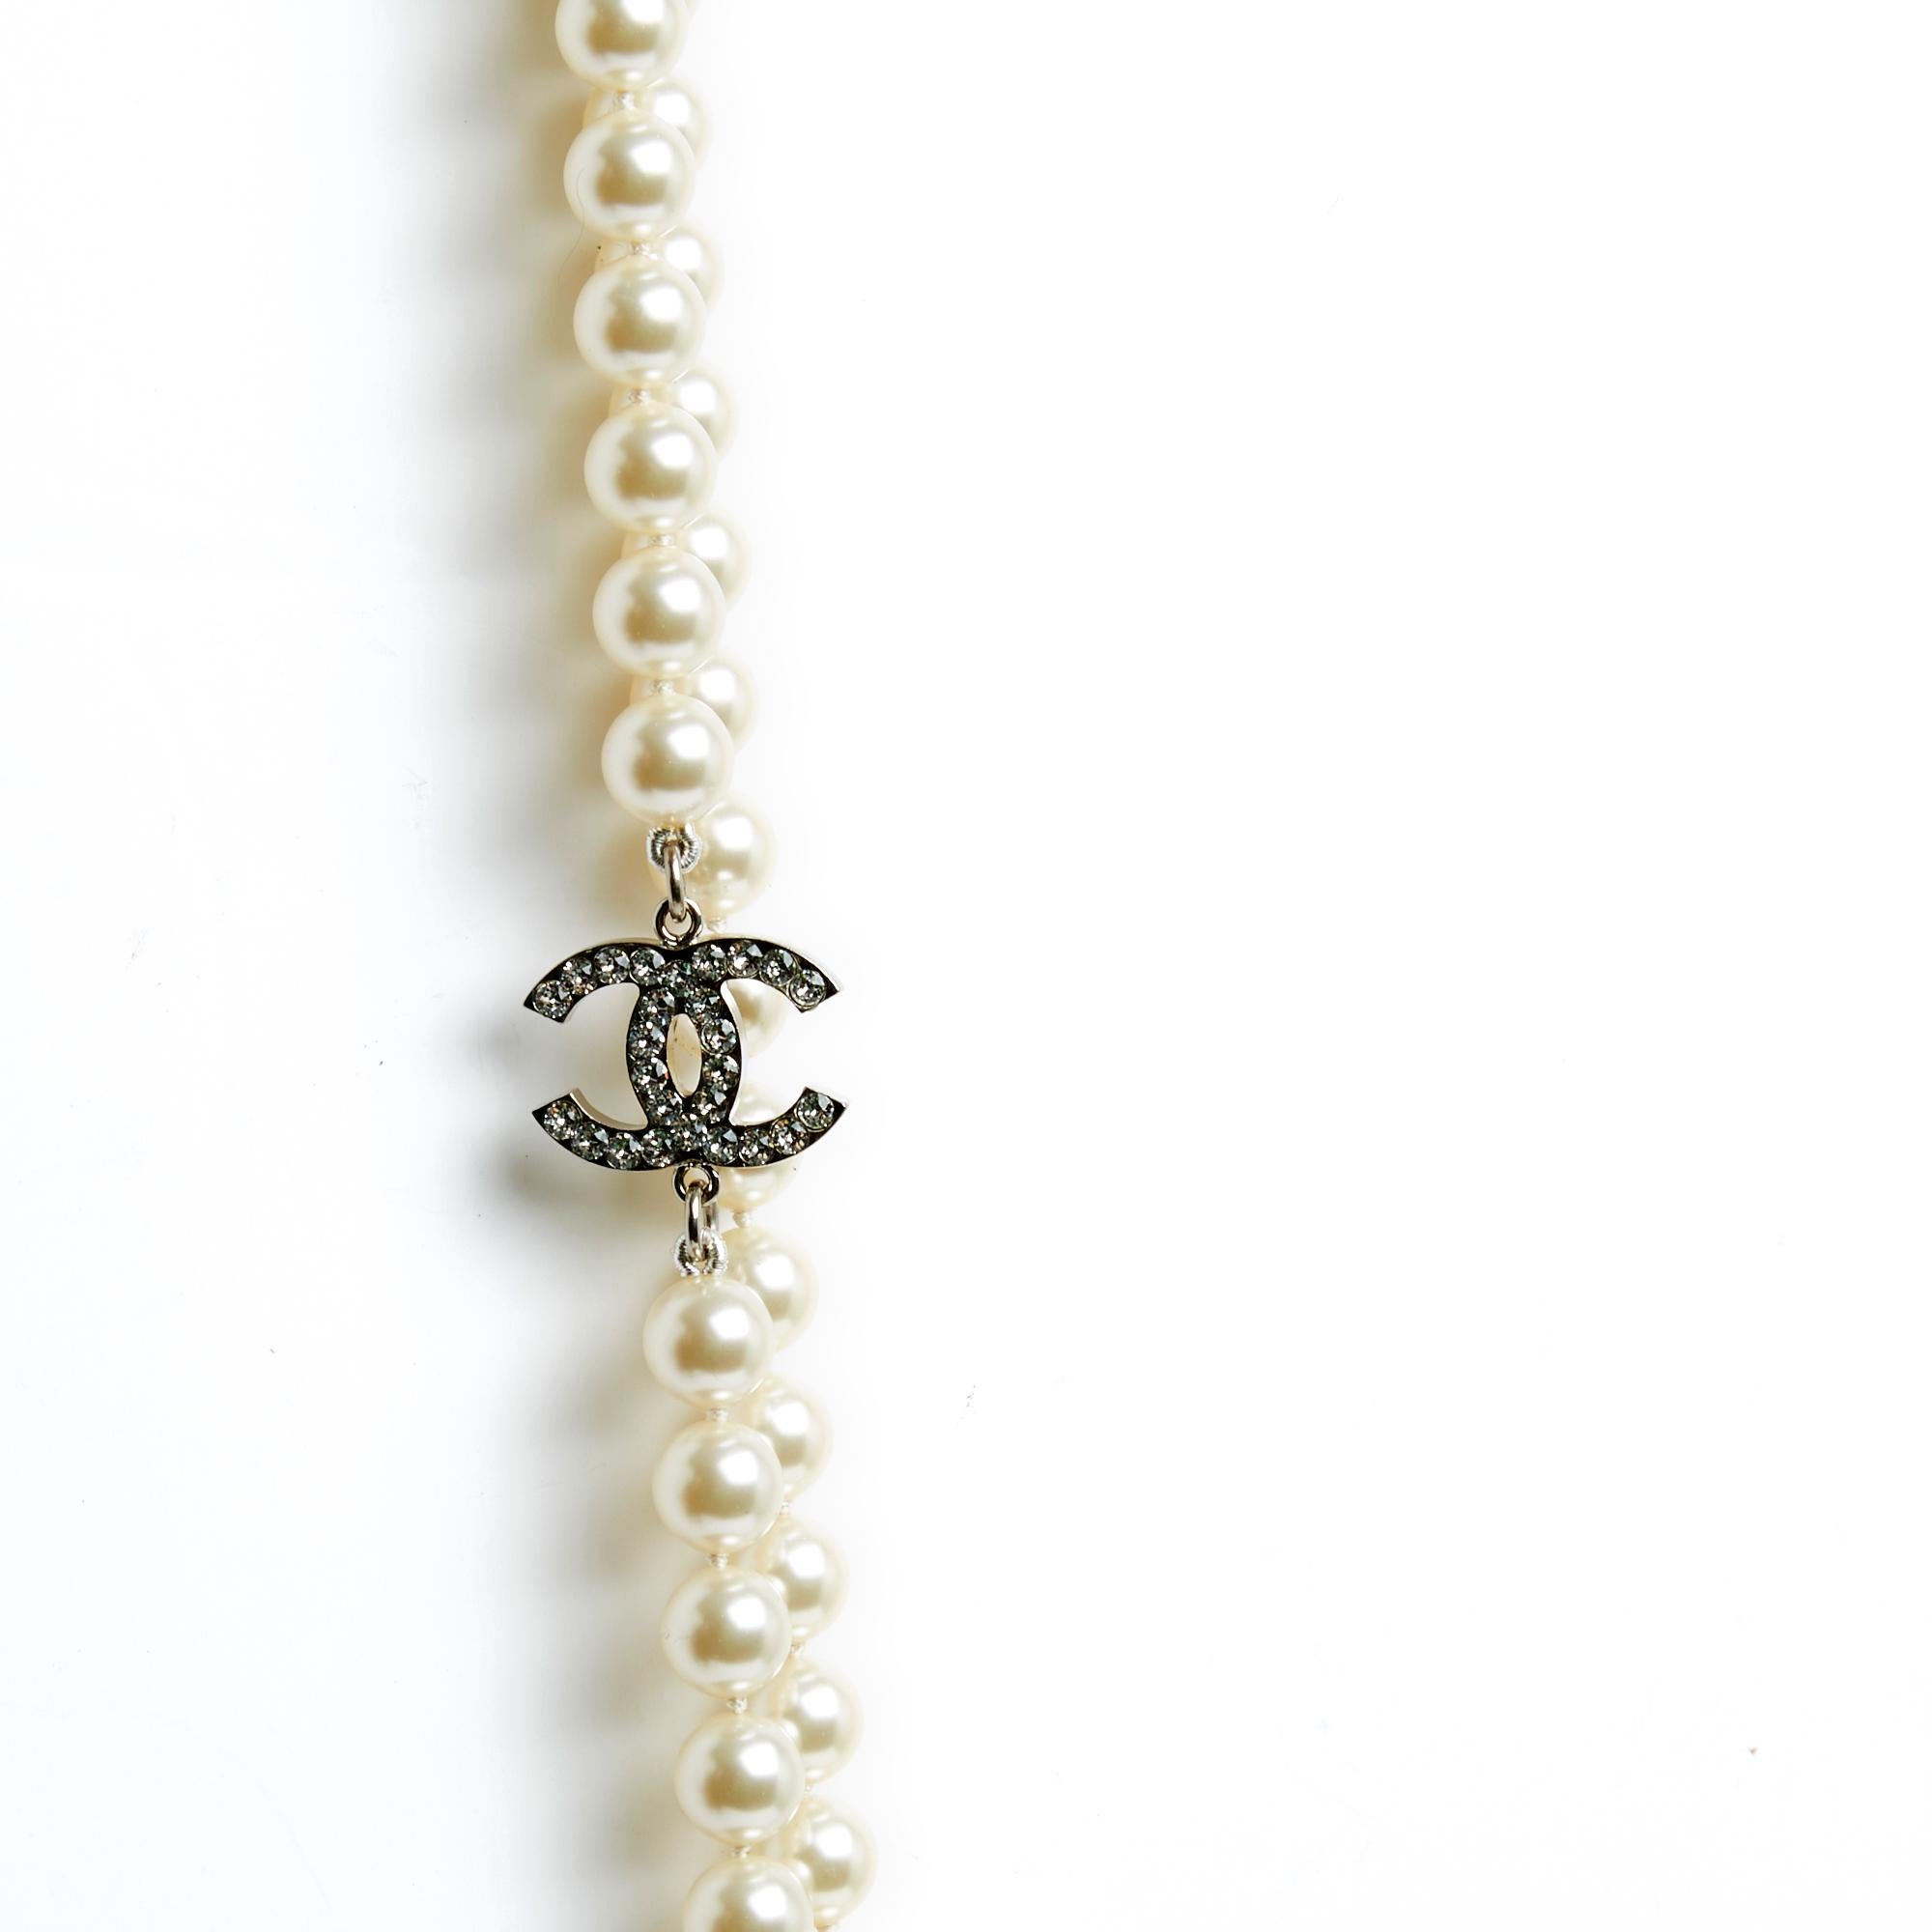 Chanel long necklace dating from 2008 composed of a very long row of fancy pearls interspersed with 5 Chanel CC logos in silver metal inlaid with white rhinestones, closing with a carabiner, logo. Total length of the necklace (closed!) 112 cm,